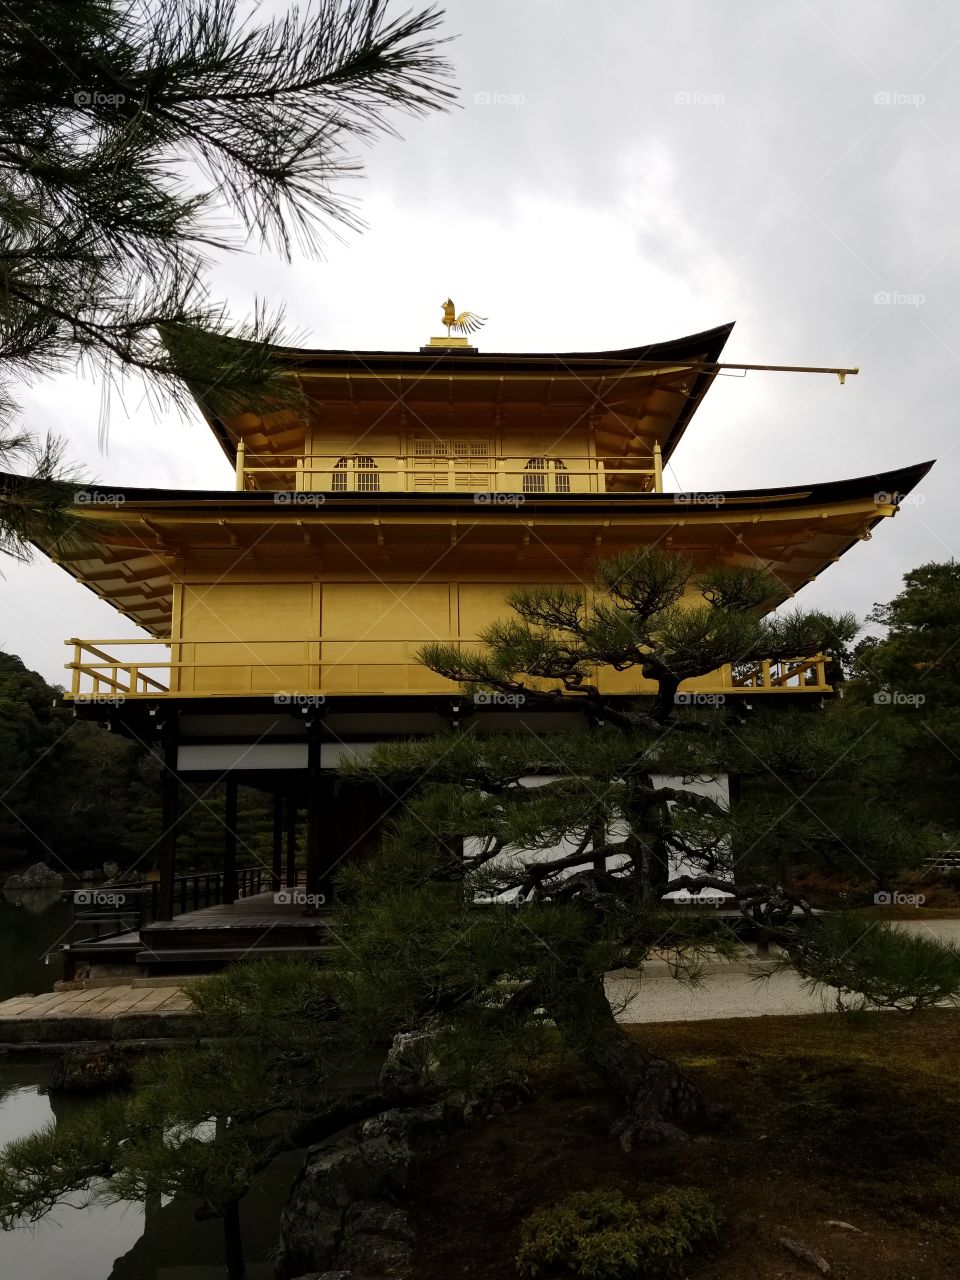 A close up shot of Kinkakuji in Kyoto.
Gold palace in winter on a cold day, created a beautiful, natural filter.